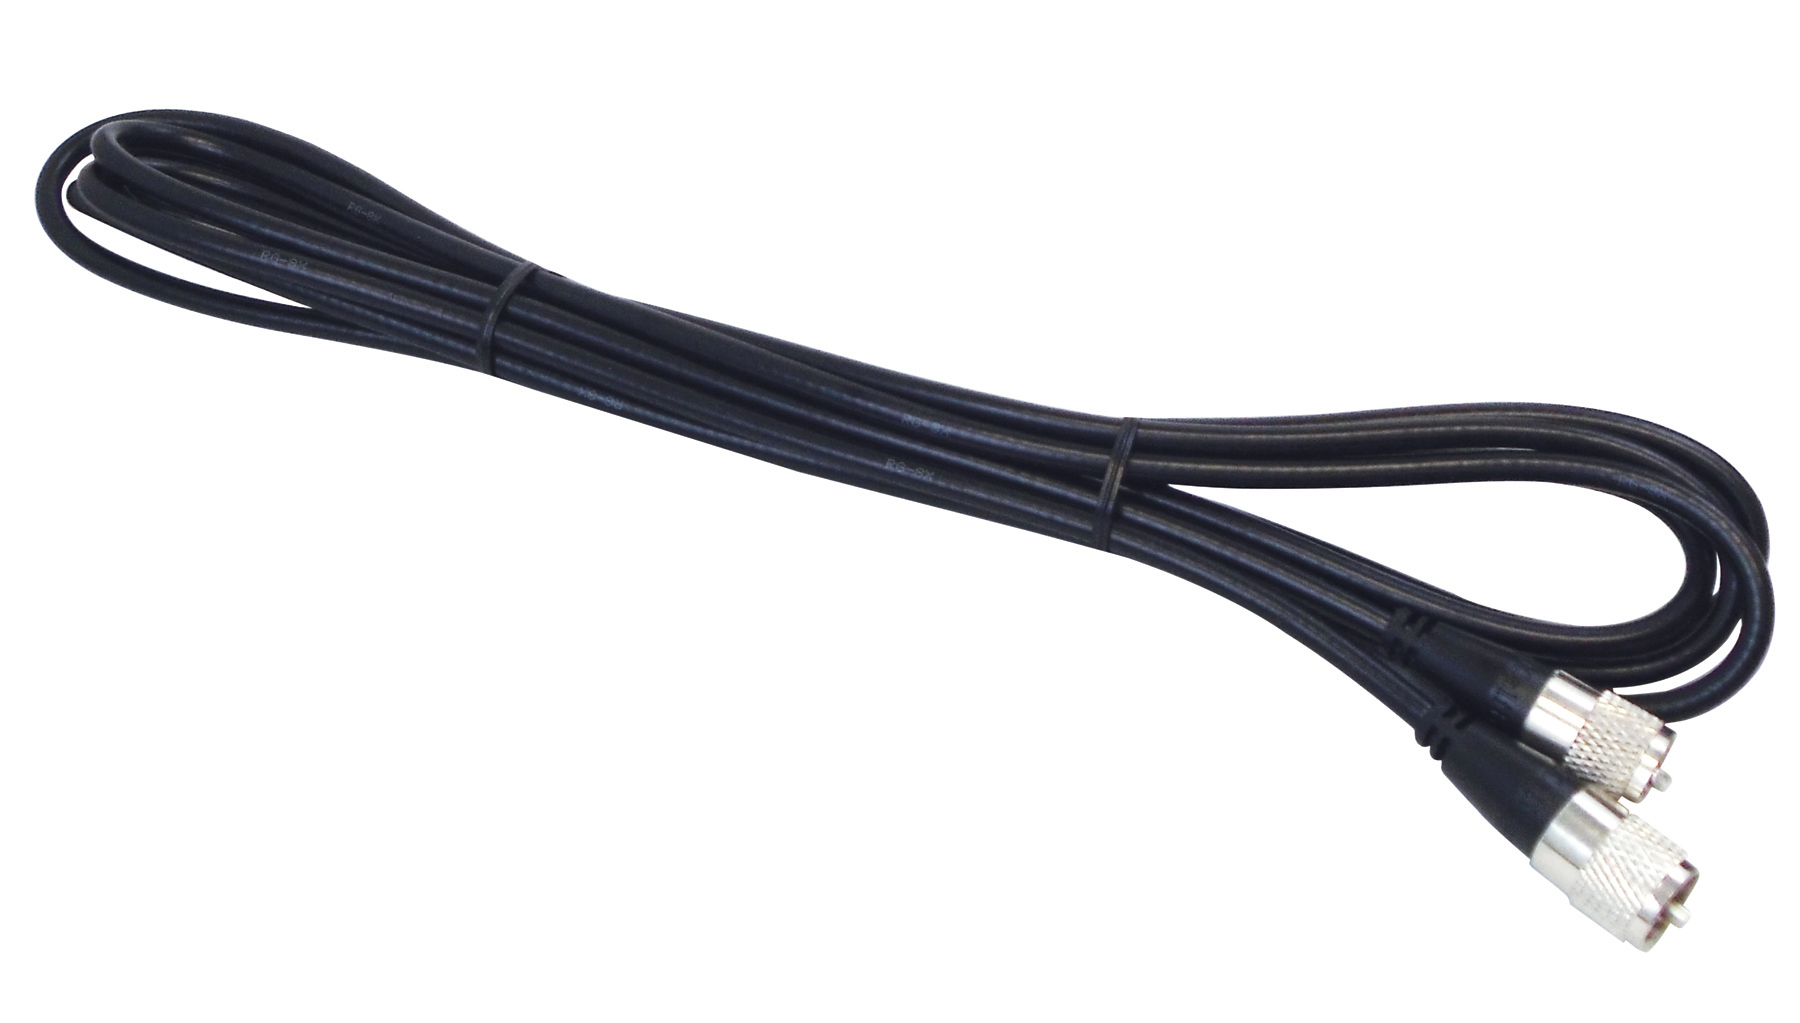 Kalibur 12 Foot Black Rg8X Coax Cable Assembly With Molded Pl259 Connectors On Each End